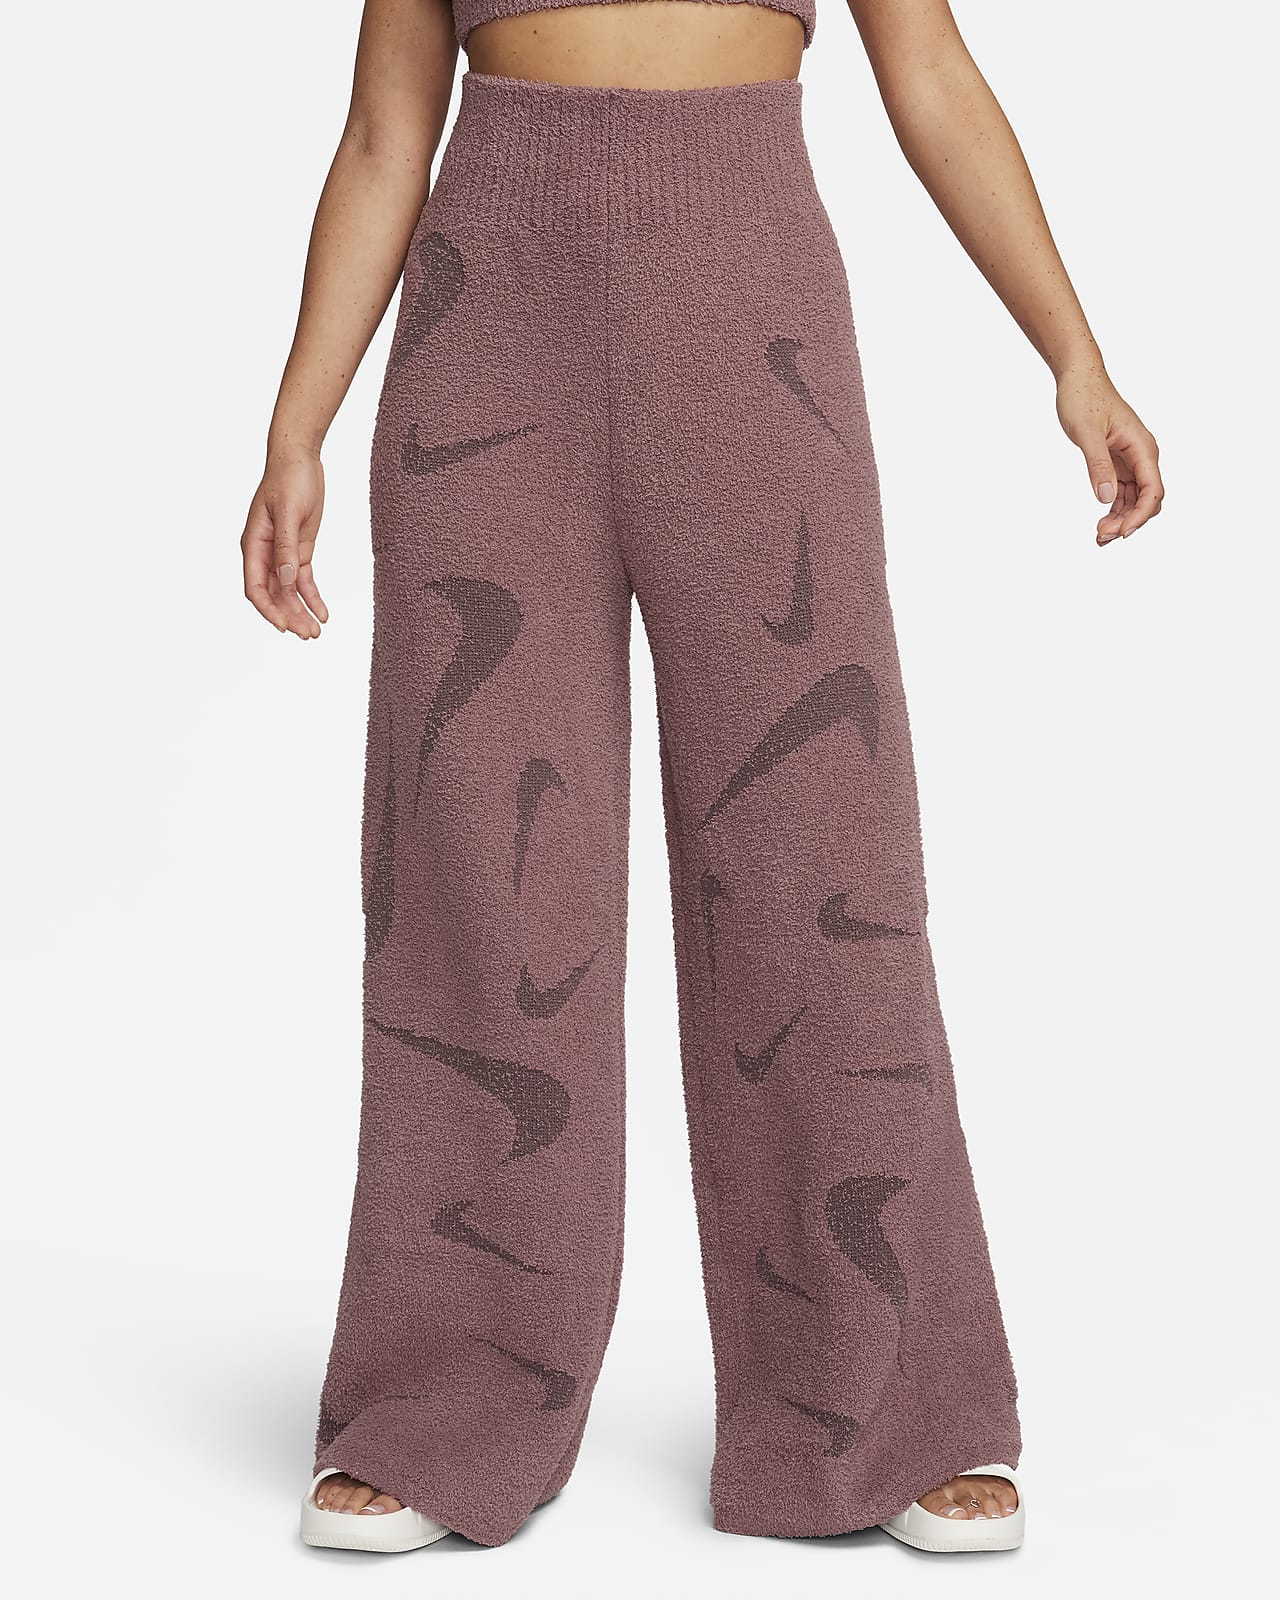 High-Waisted Wide-Leg Knit Pants in Pink